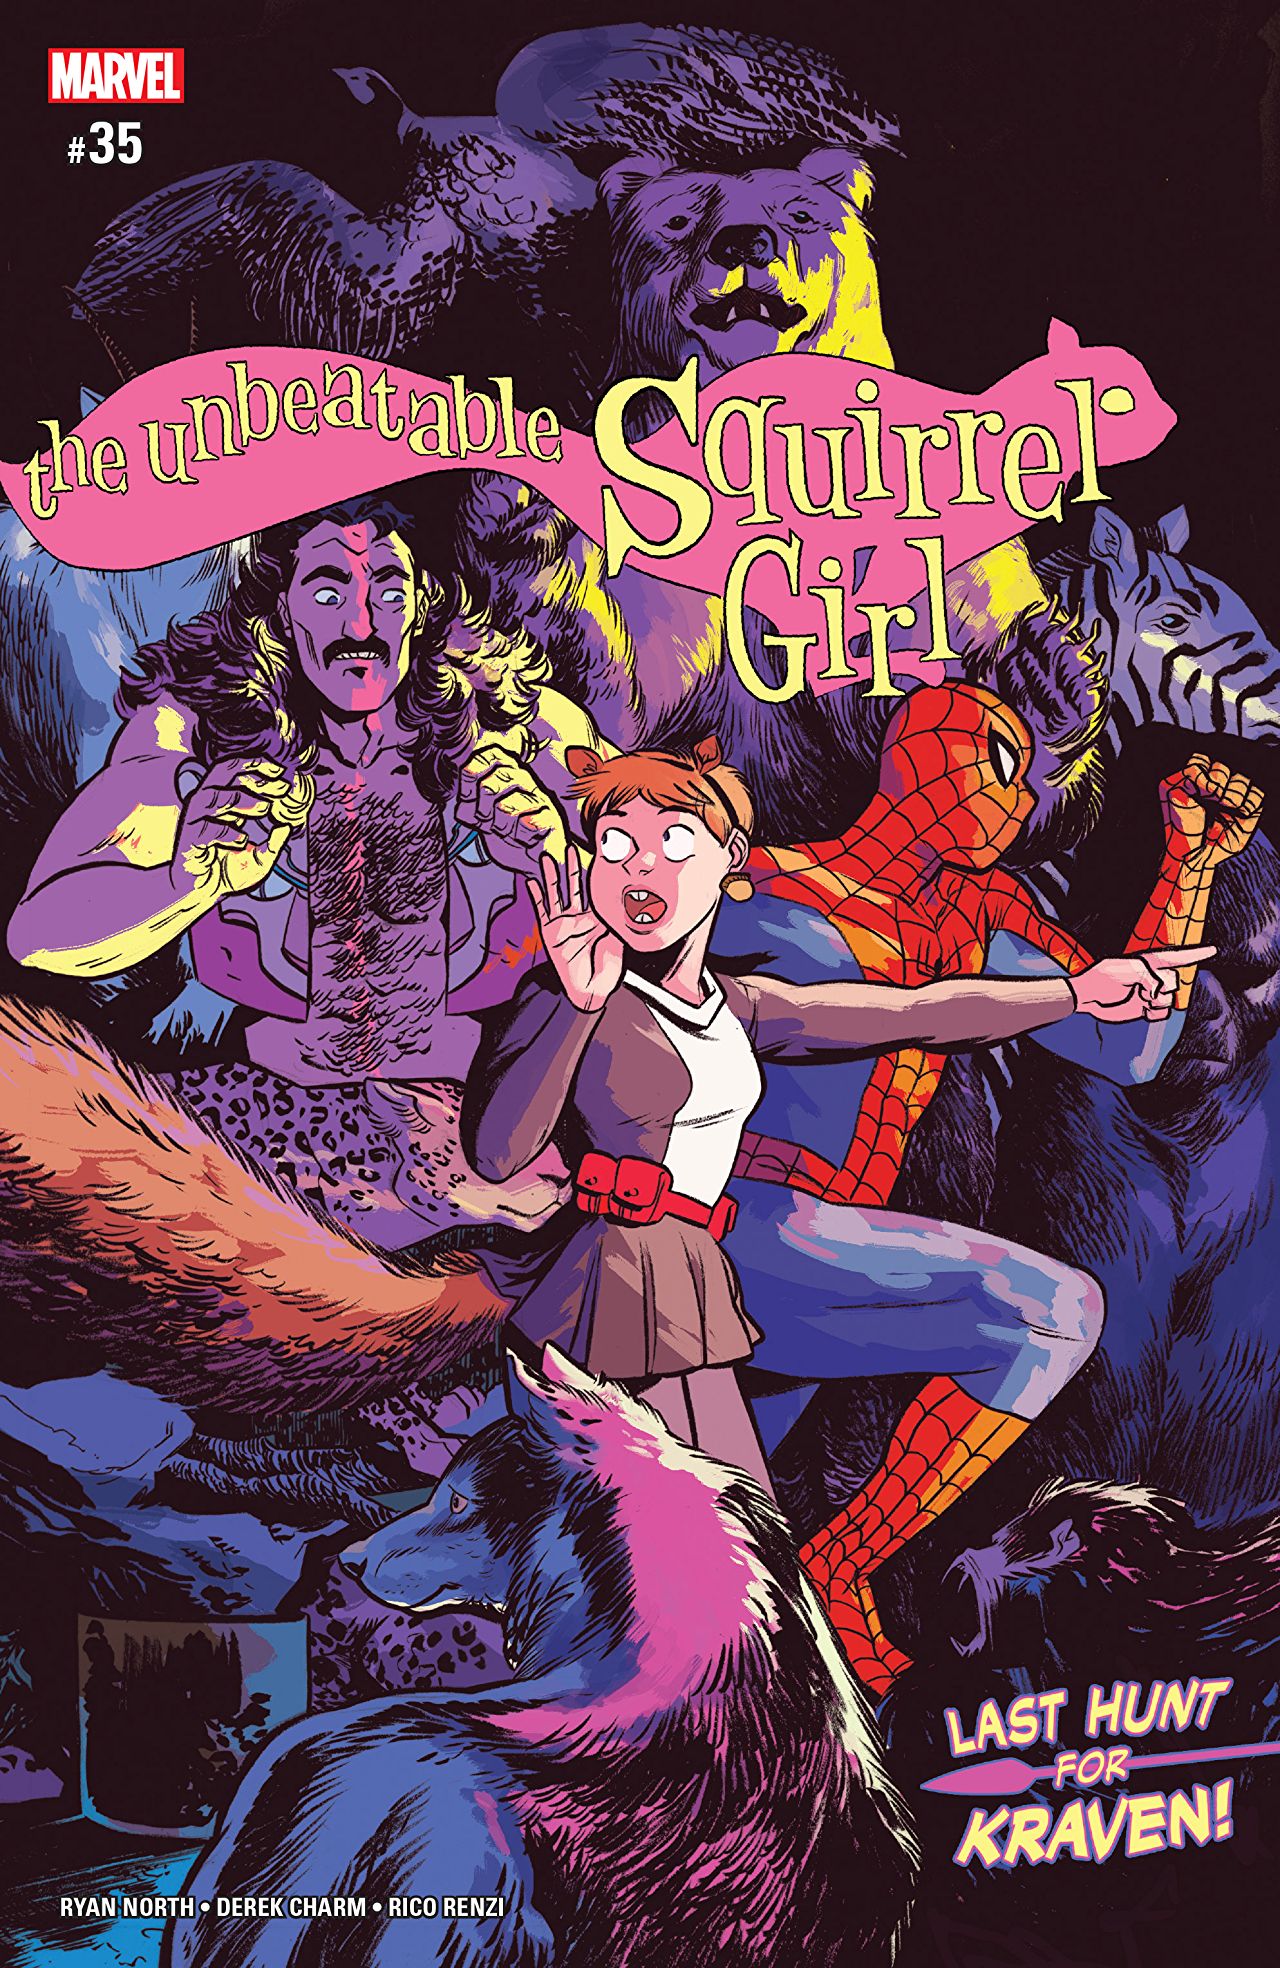 The Unbeatable Squirrel Girl #35 review: With great power...